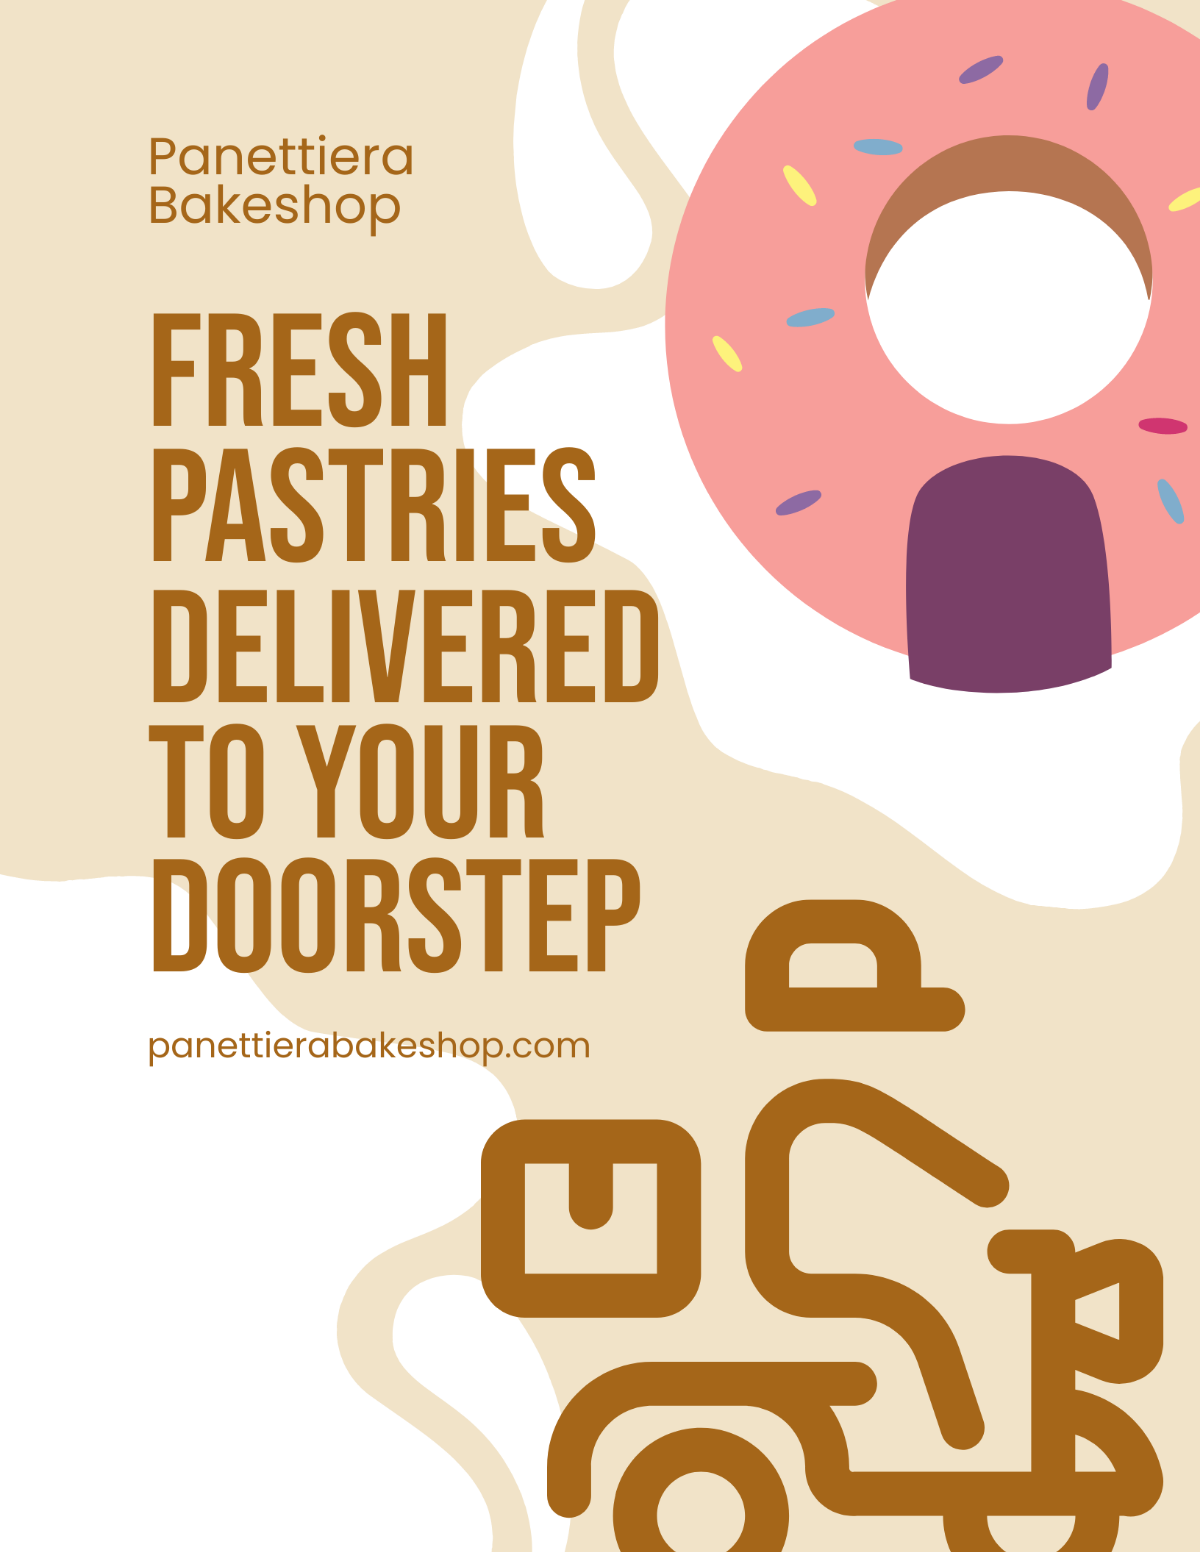 Bakery Delivery Services Flyer Template